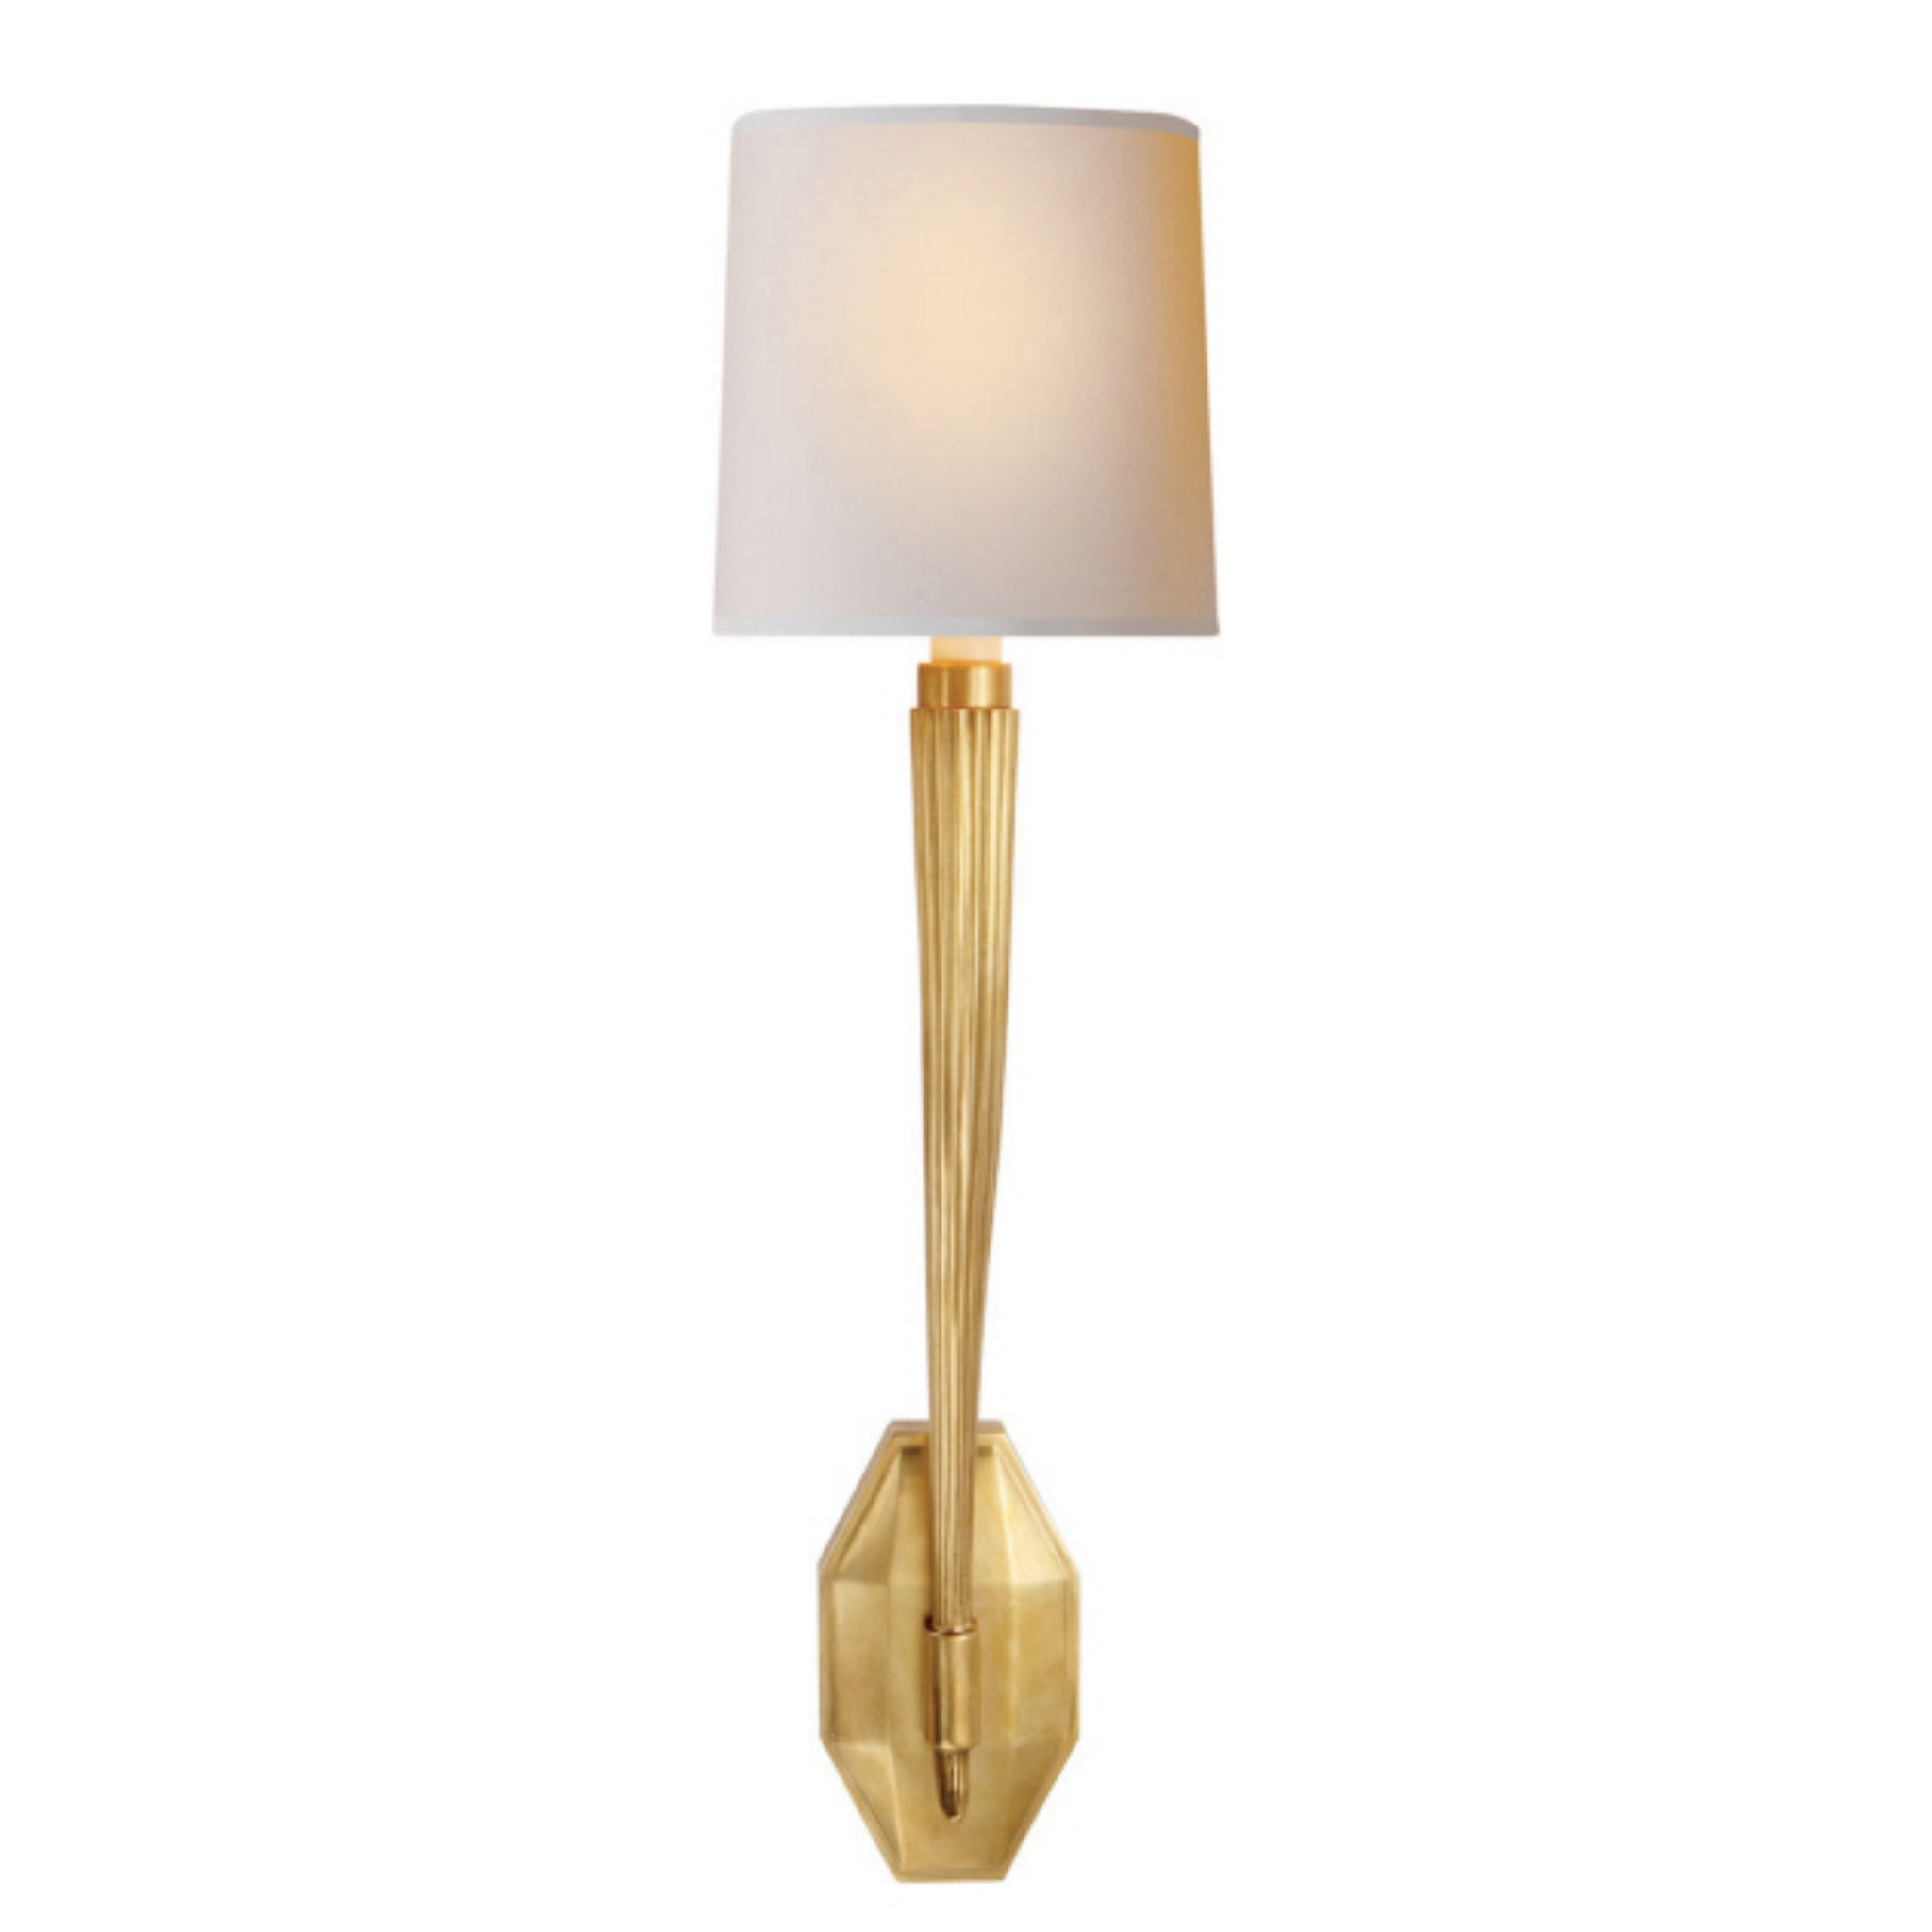 Chapman & Myers Ruhlmann Single Sconce in Antique-Burnished Brass with Natural Paper Shade